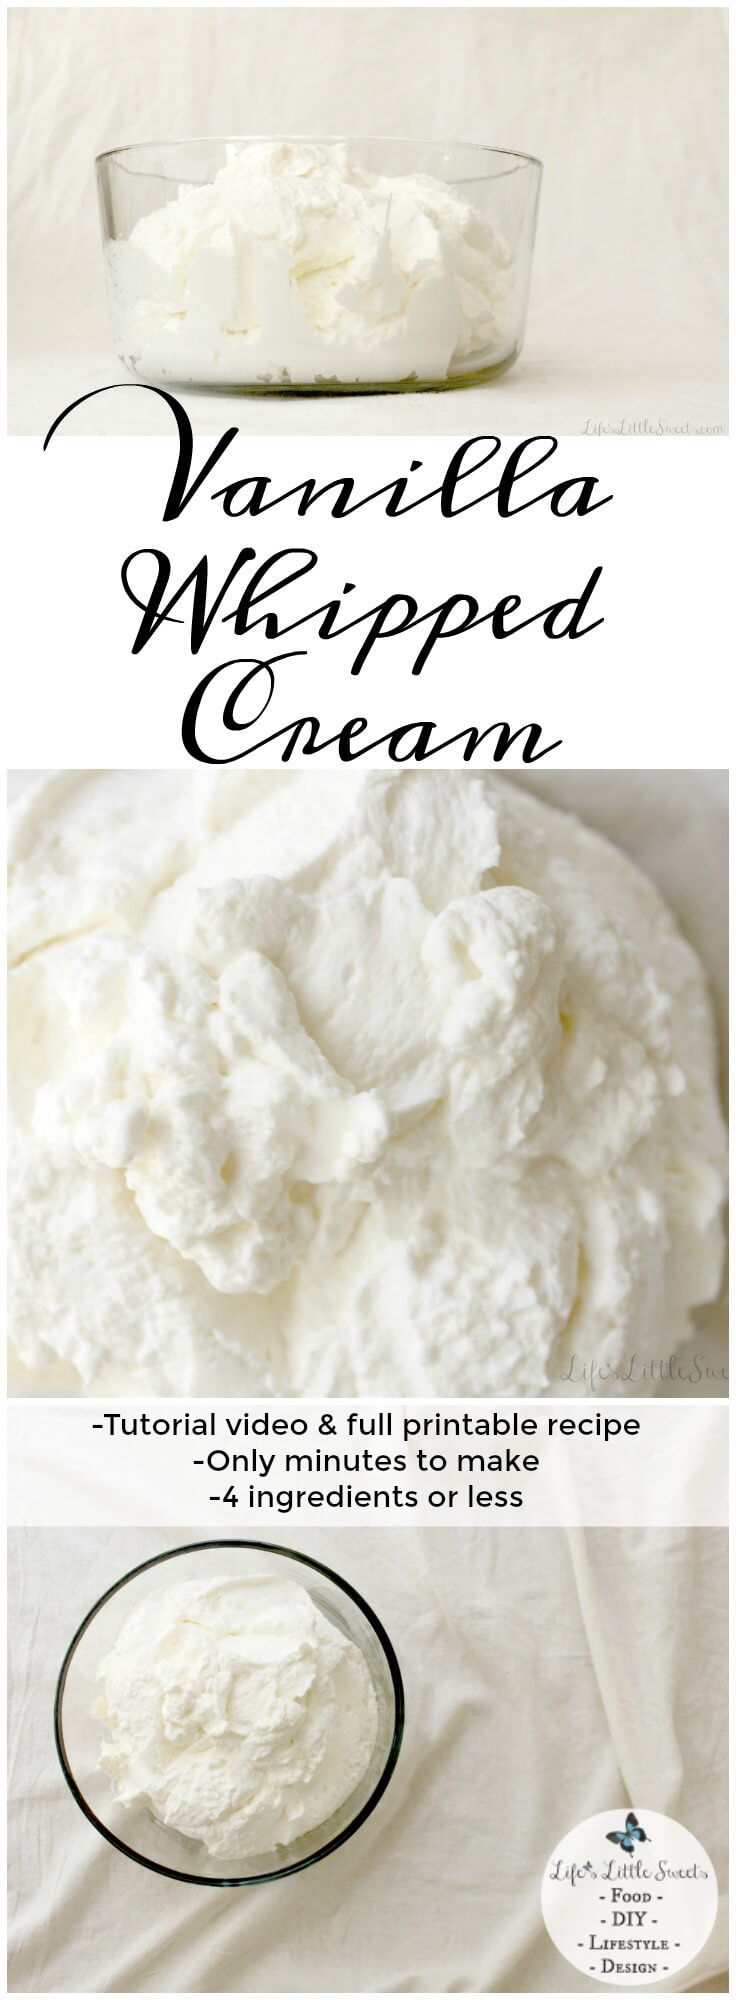 (Video) Vanilla whipped cream, also called vanilla Chantilly cream, is the perfect topping to a dessert, ice cream or even a coffee drink.